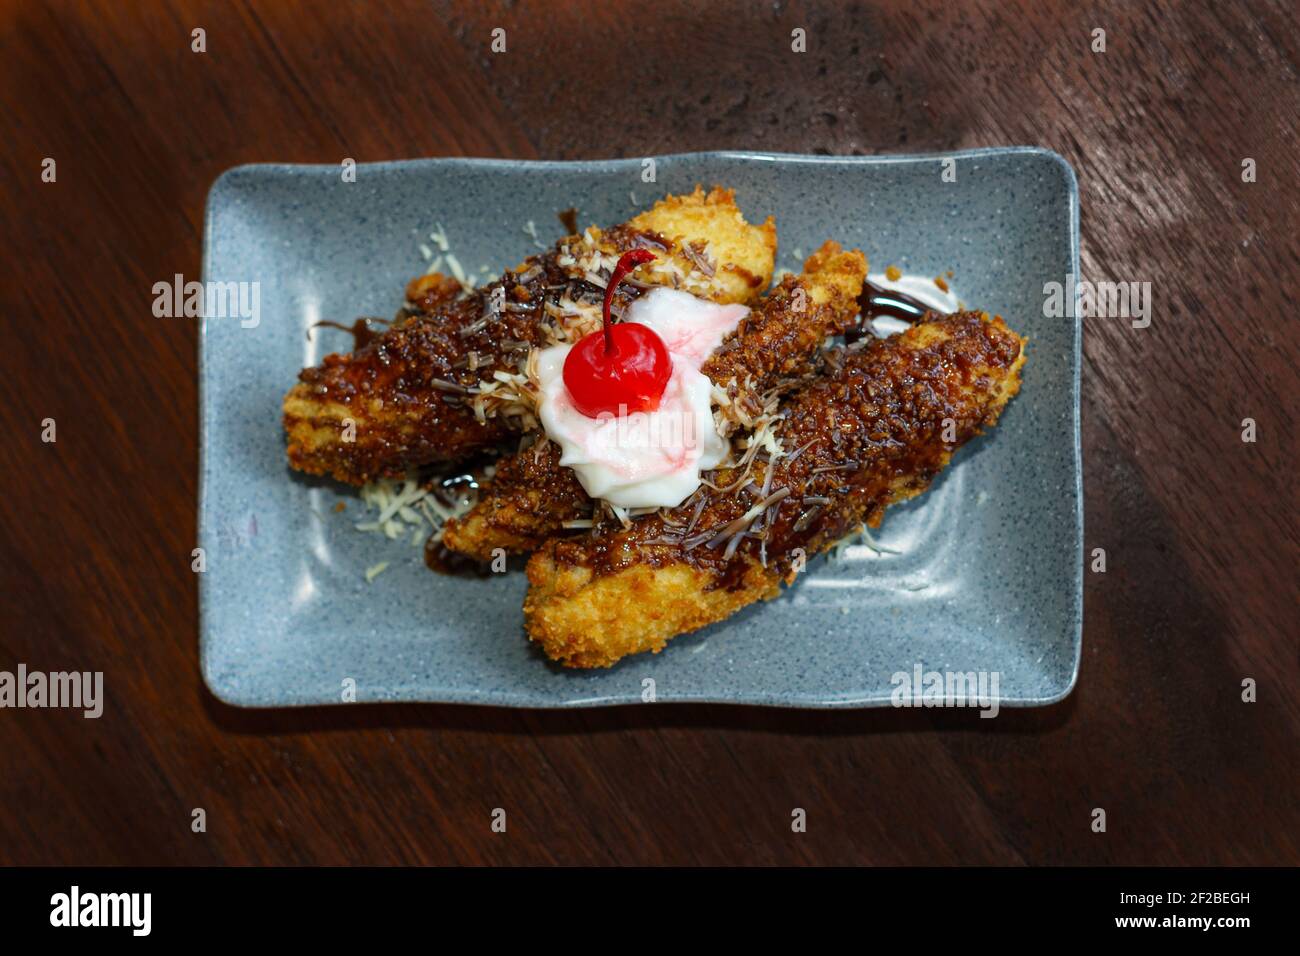 Fried bananas with buttercream icing and a glace cherry garnish Stock Photo